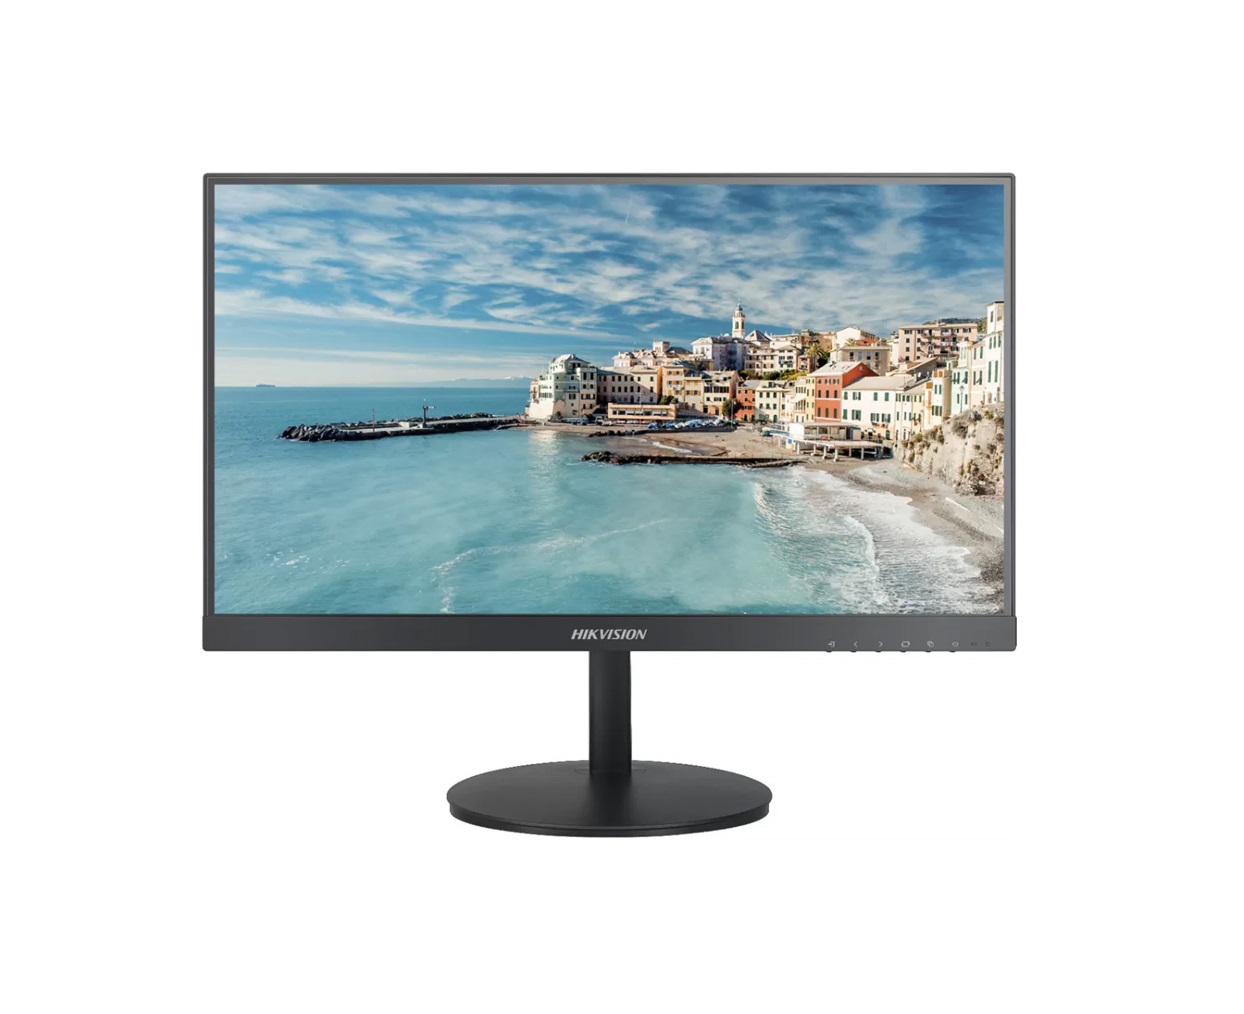 Hikvision DS-D5024FN-C 23.8inch  Monitor 